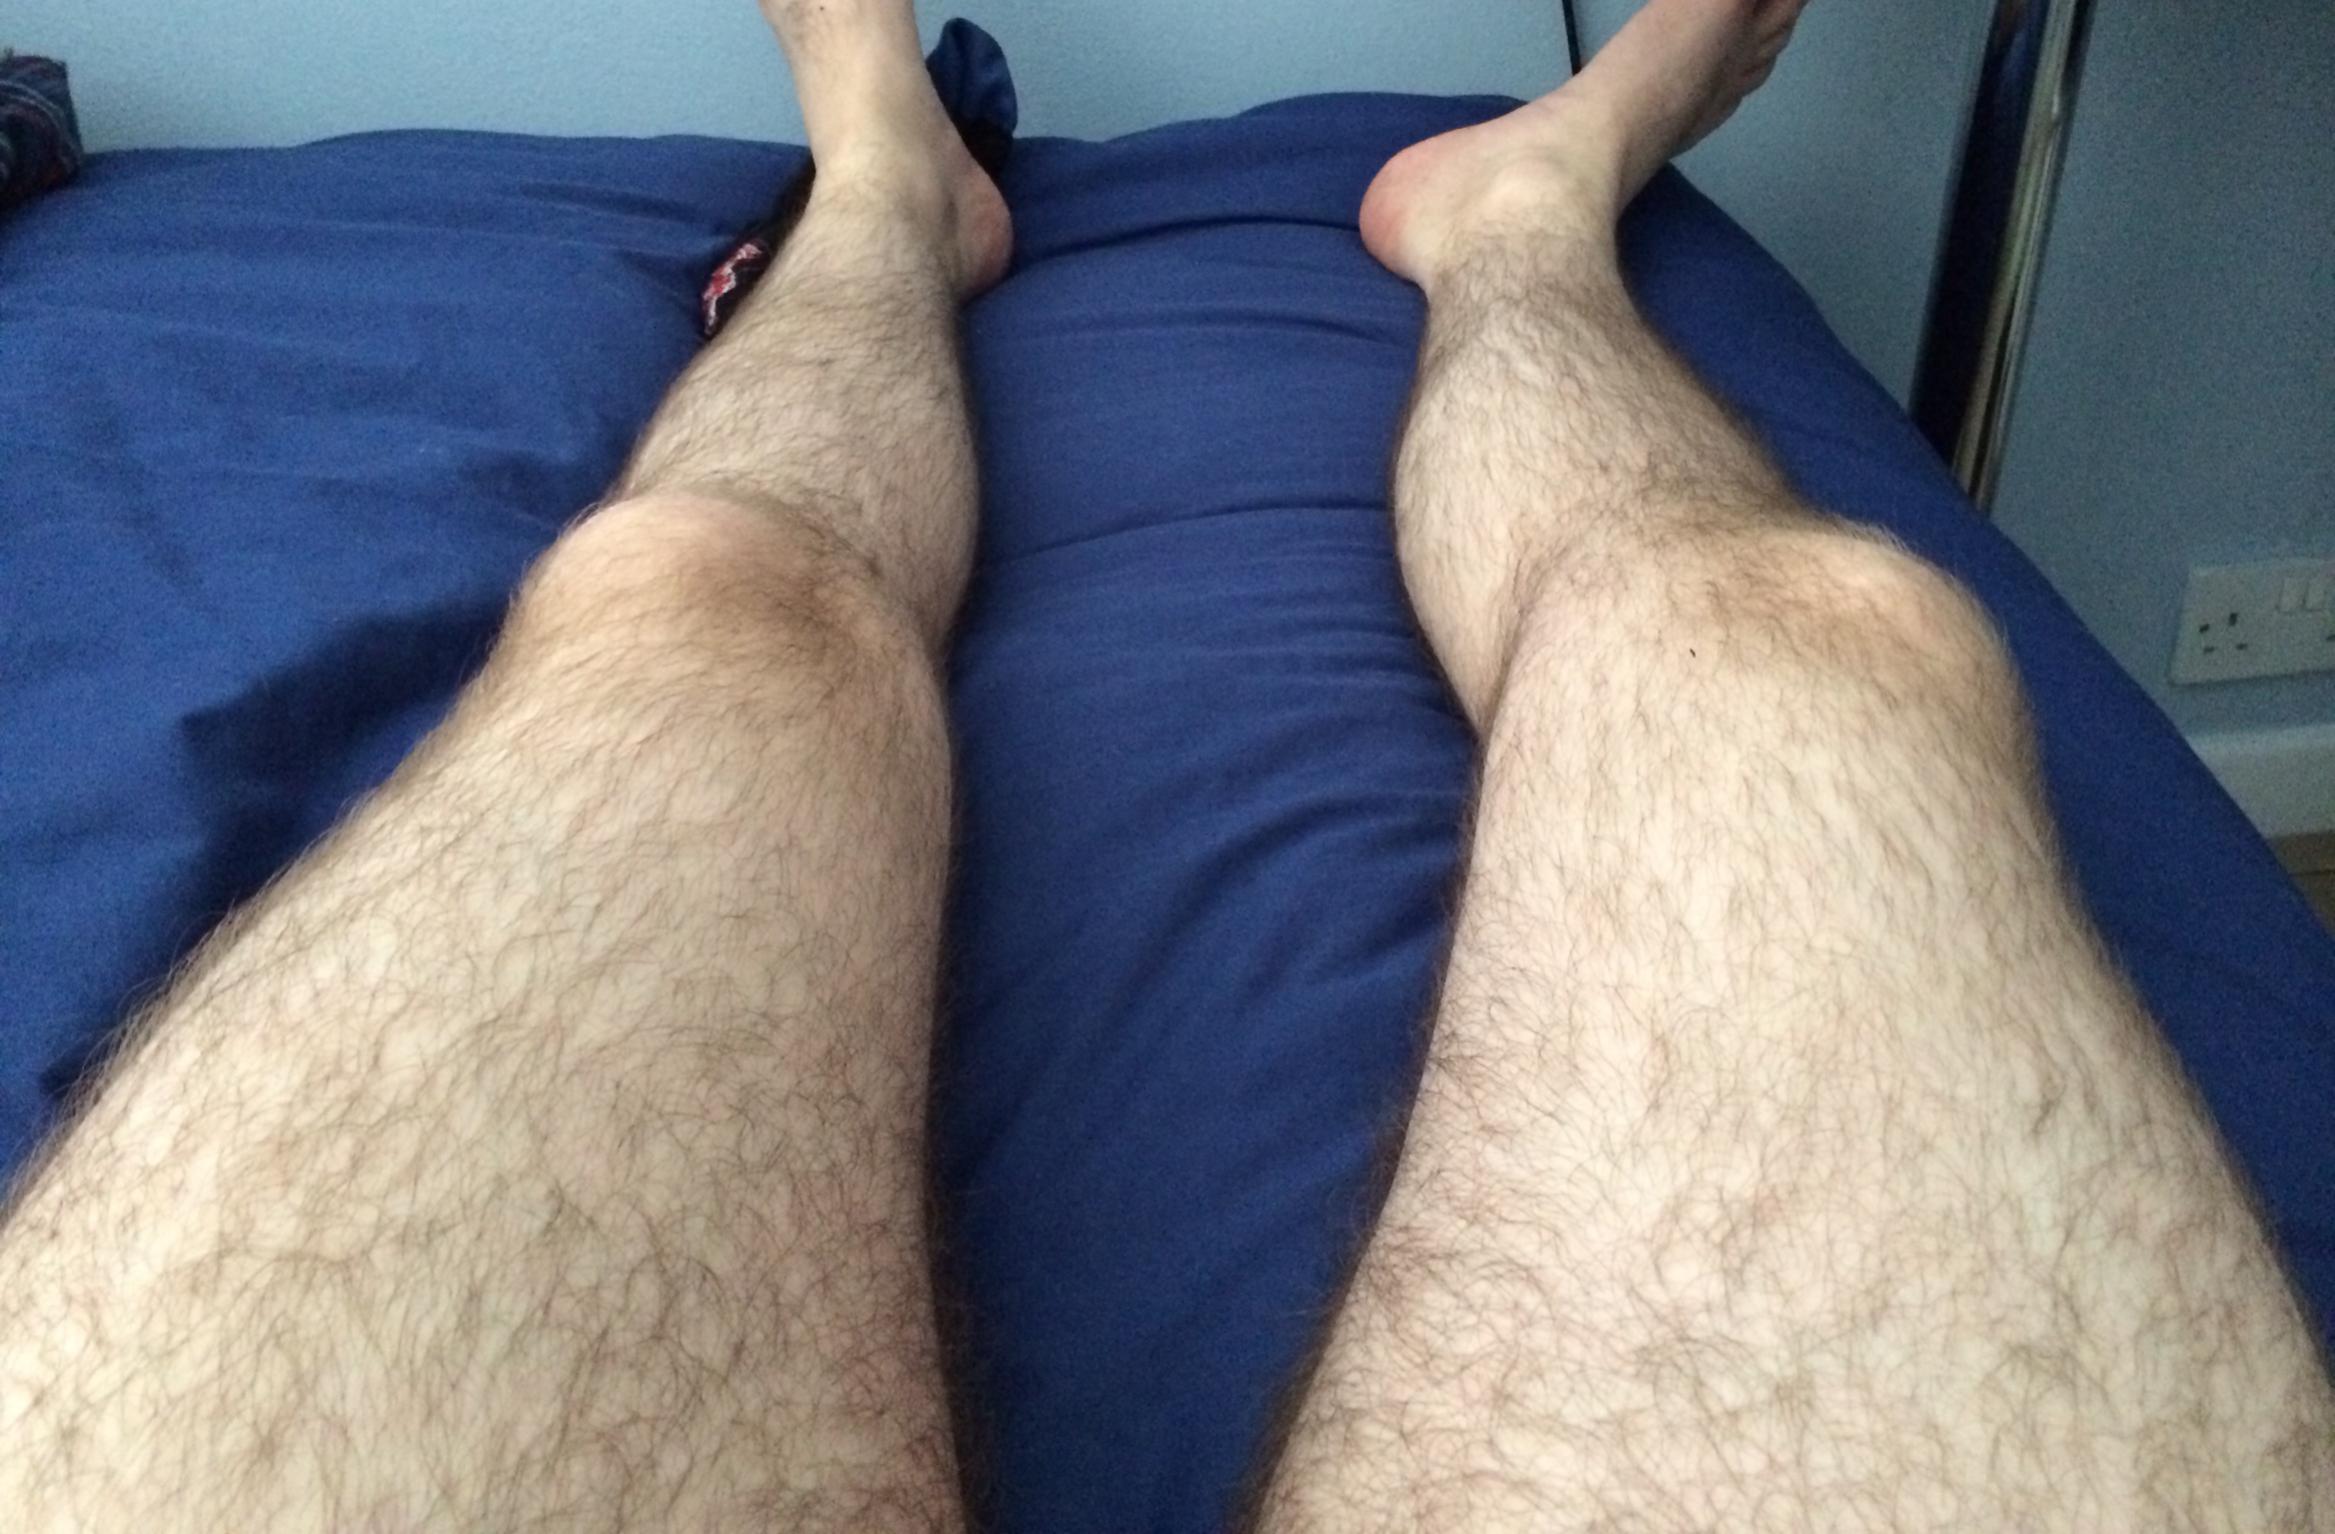 why are my legs so hairy